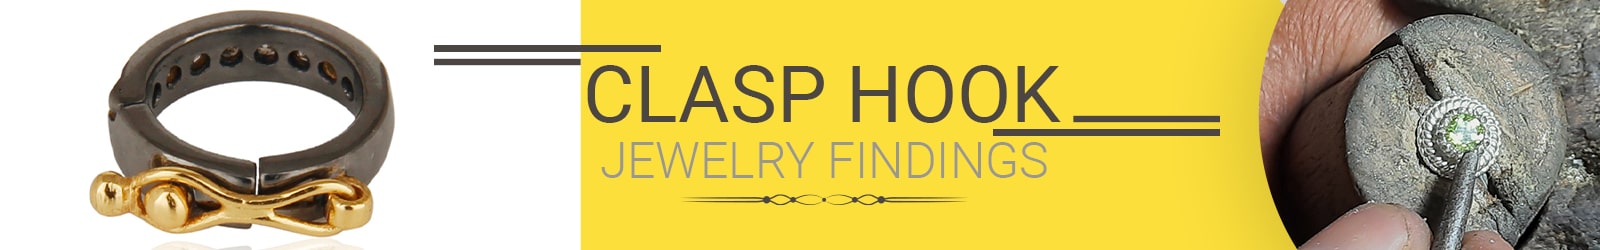 Clasp And Hook Jewelry Findings